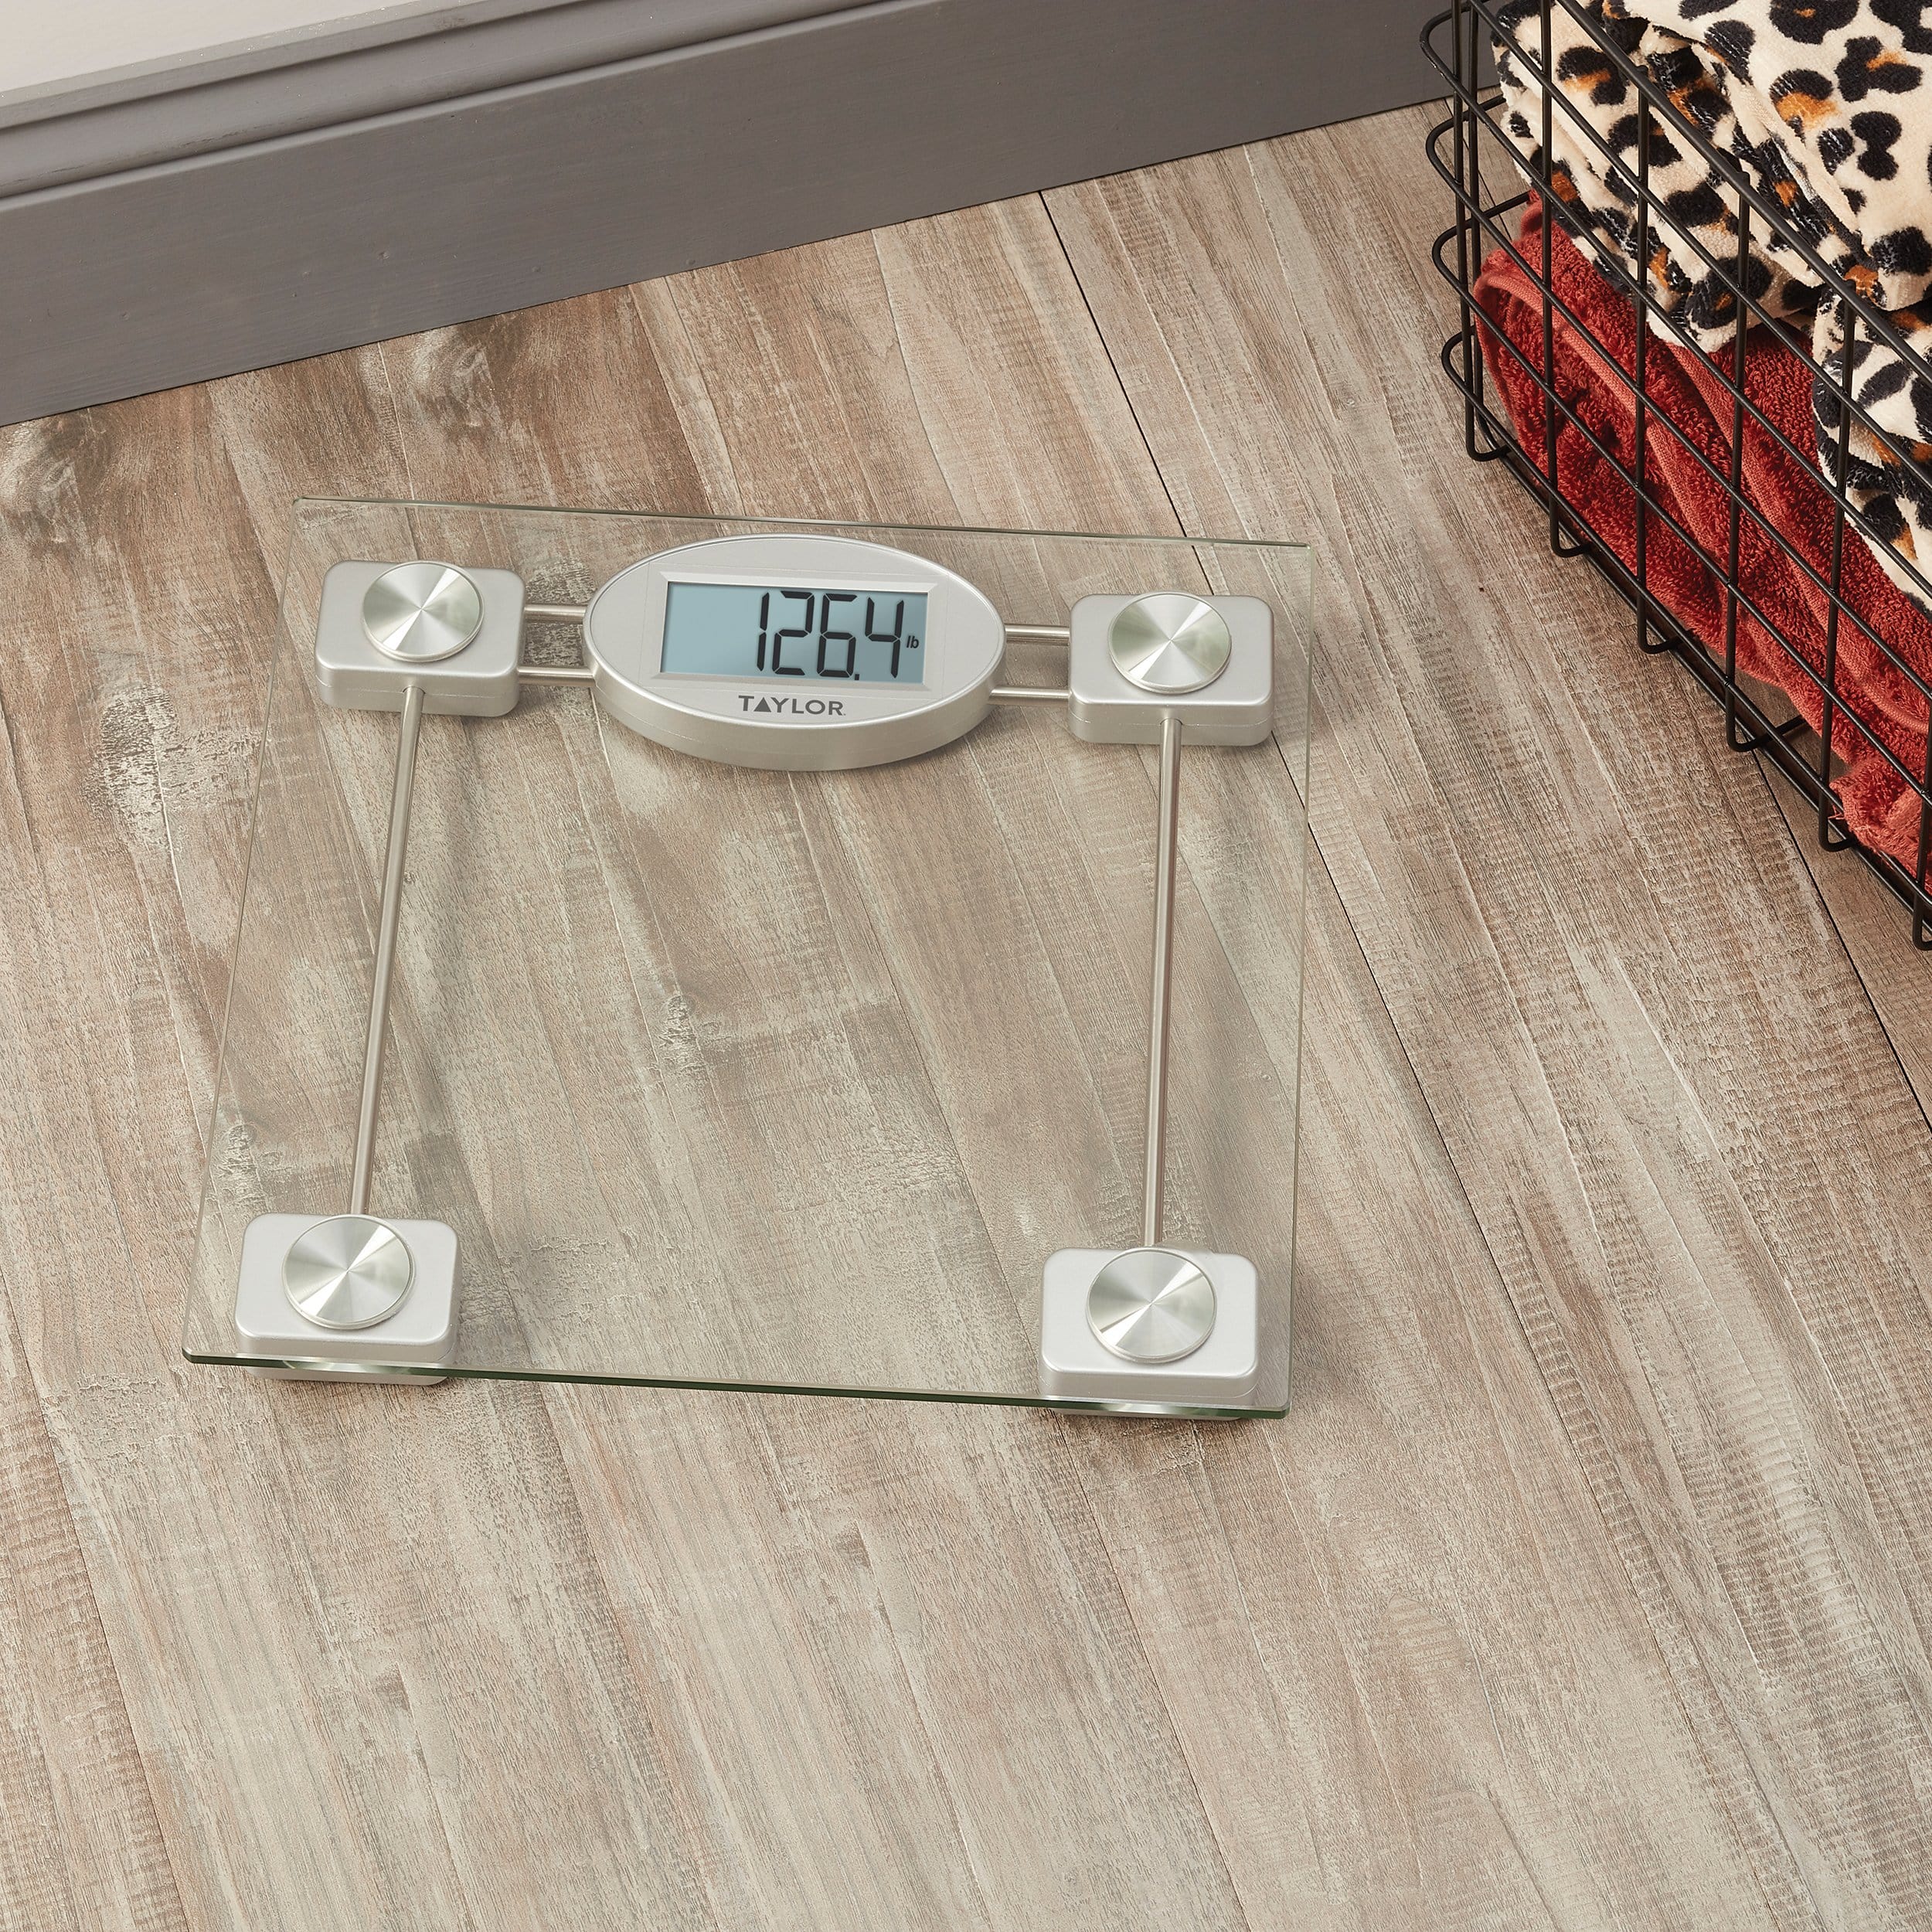 Digital Bathroom Scale with Stainless Steel Frame